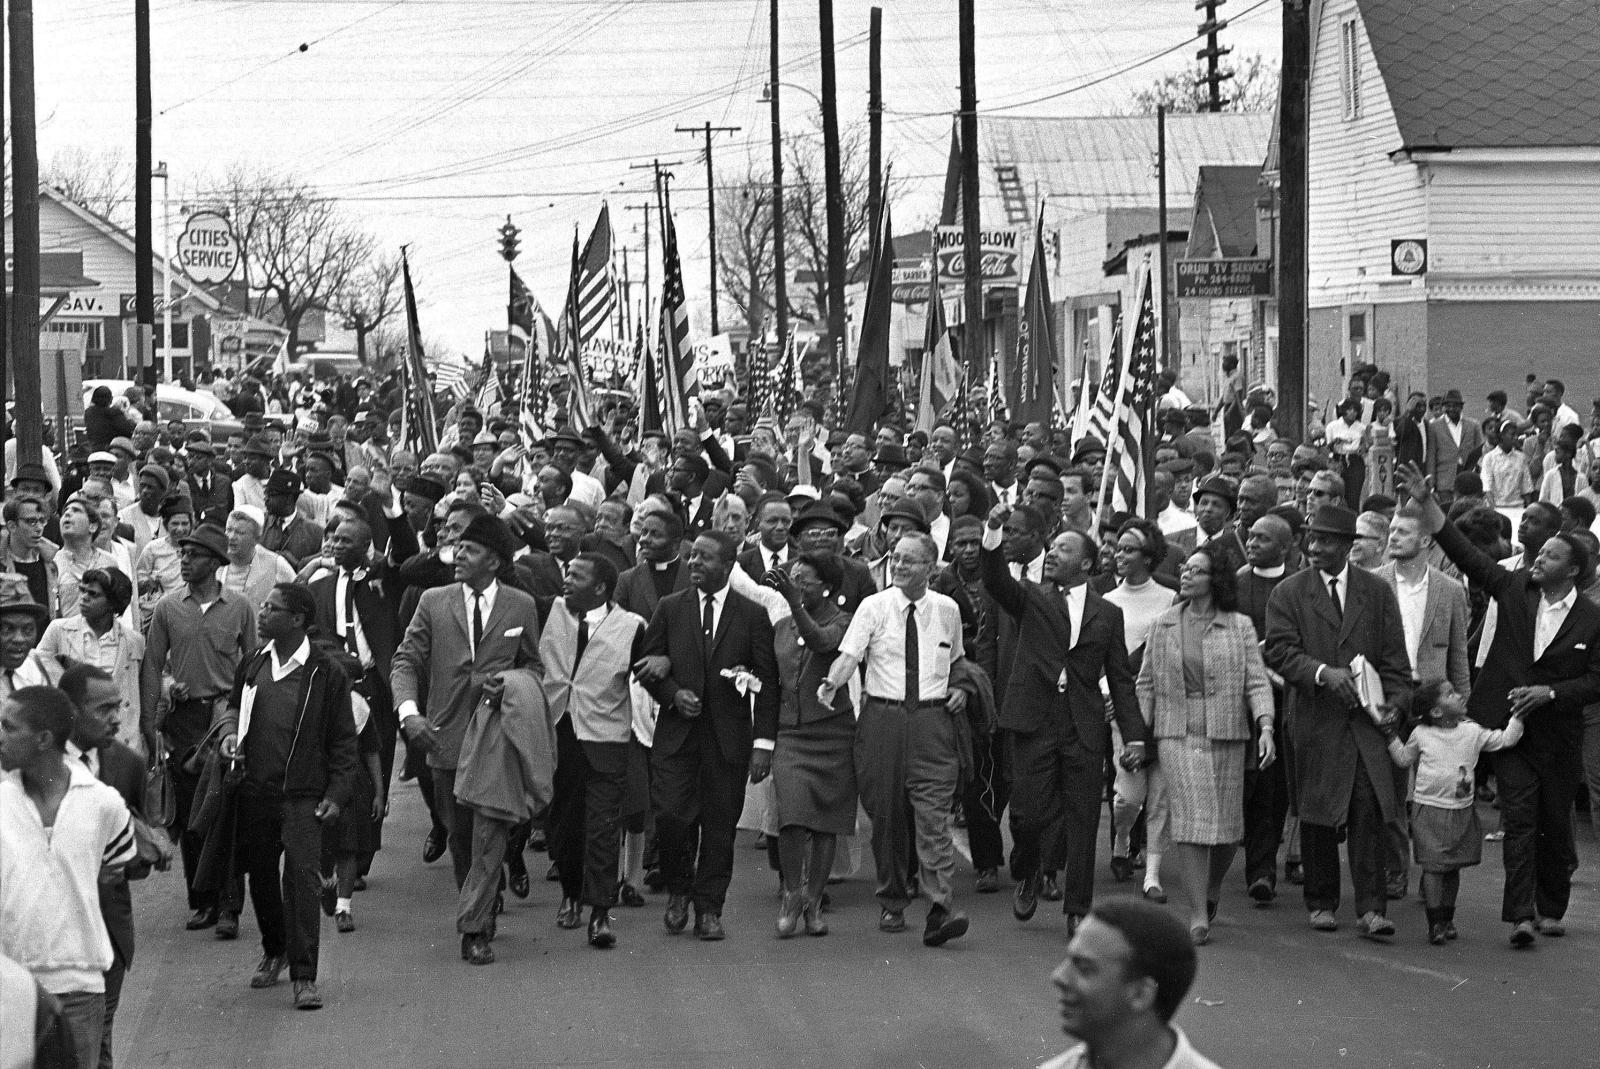 The Selma to Montgomery March happened for one major reason; the white supremacist trying and succeeding in keeping African Americans from voting. 